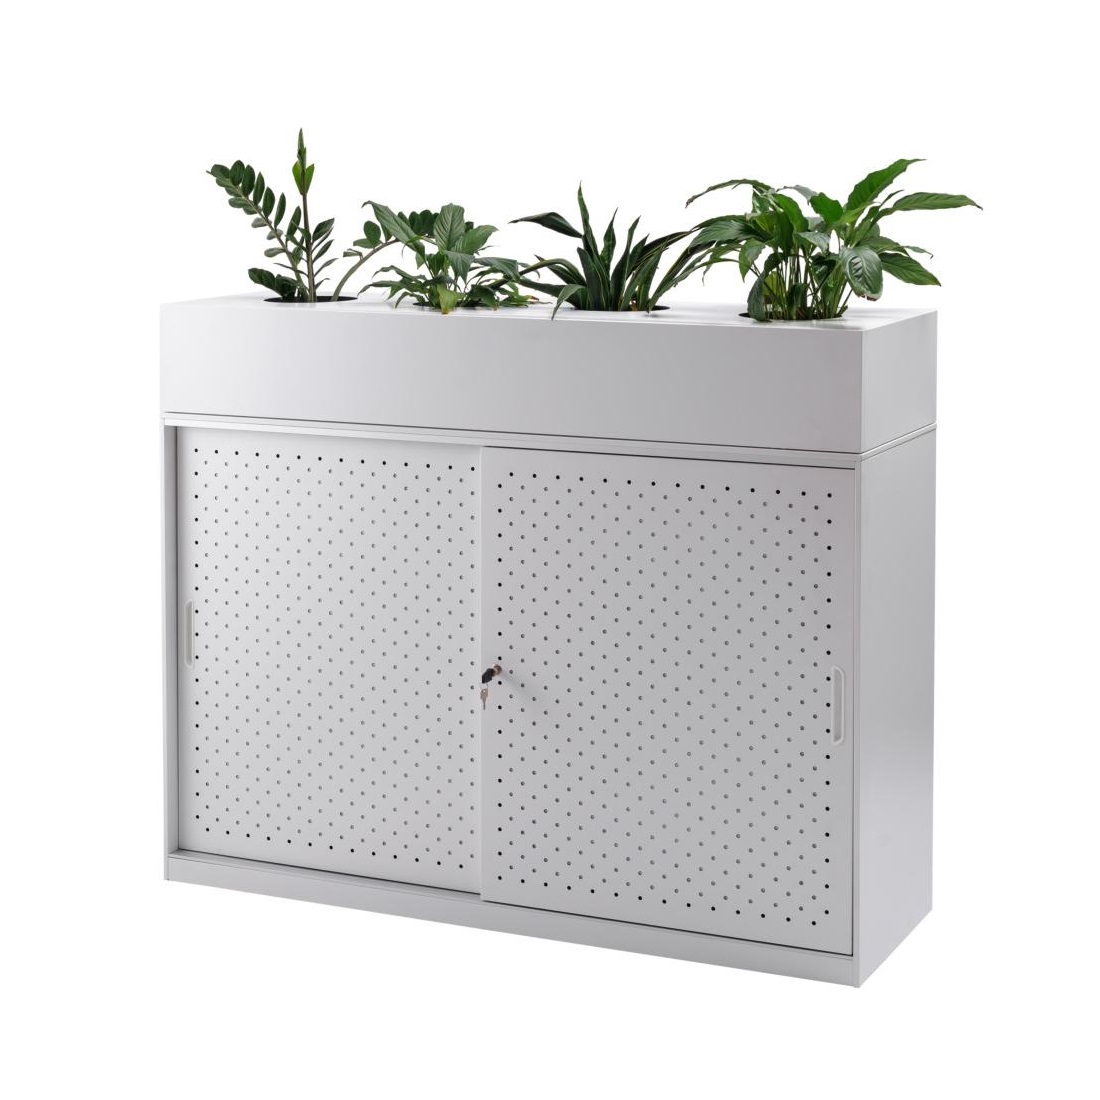 Go Planter Box for GO Perforated Cupboard